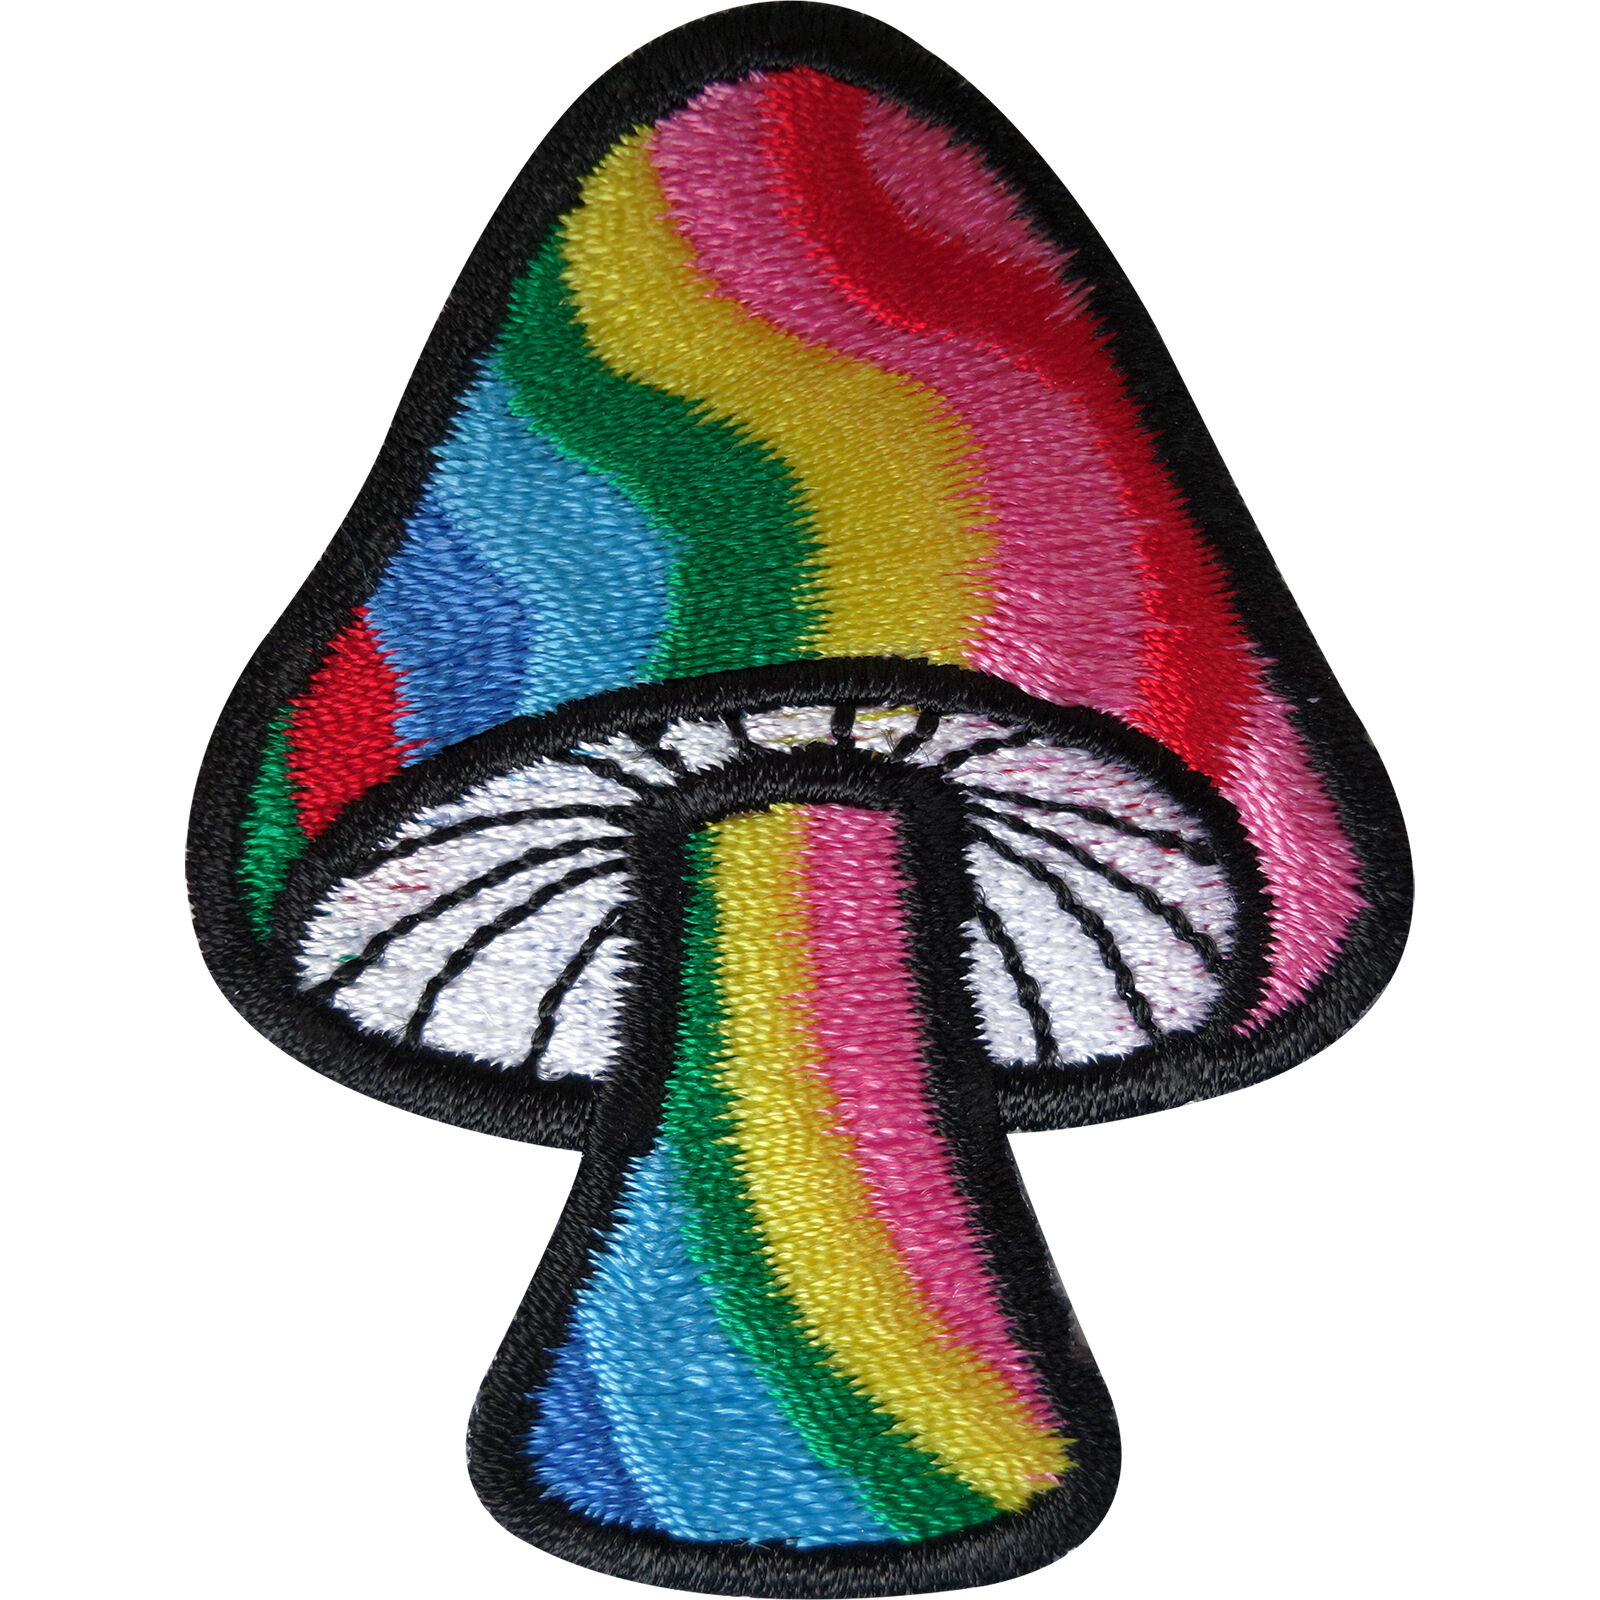 Magic Mushroom Patch Iron Sew On Clothes Jacket Bag Hippie 60s Embroidered Badge